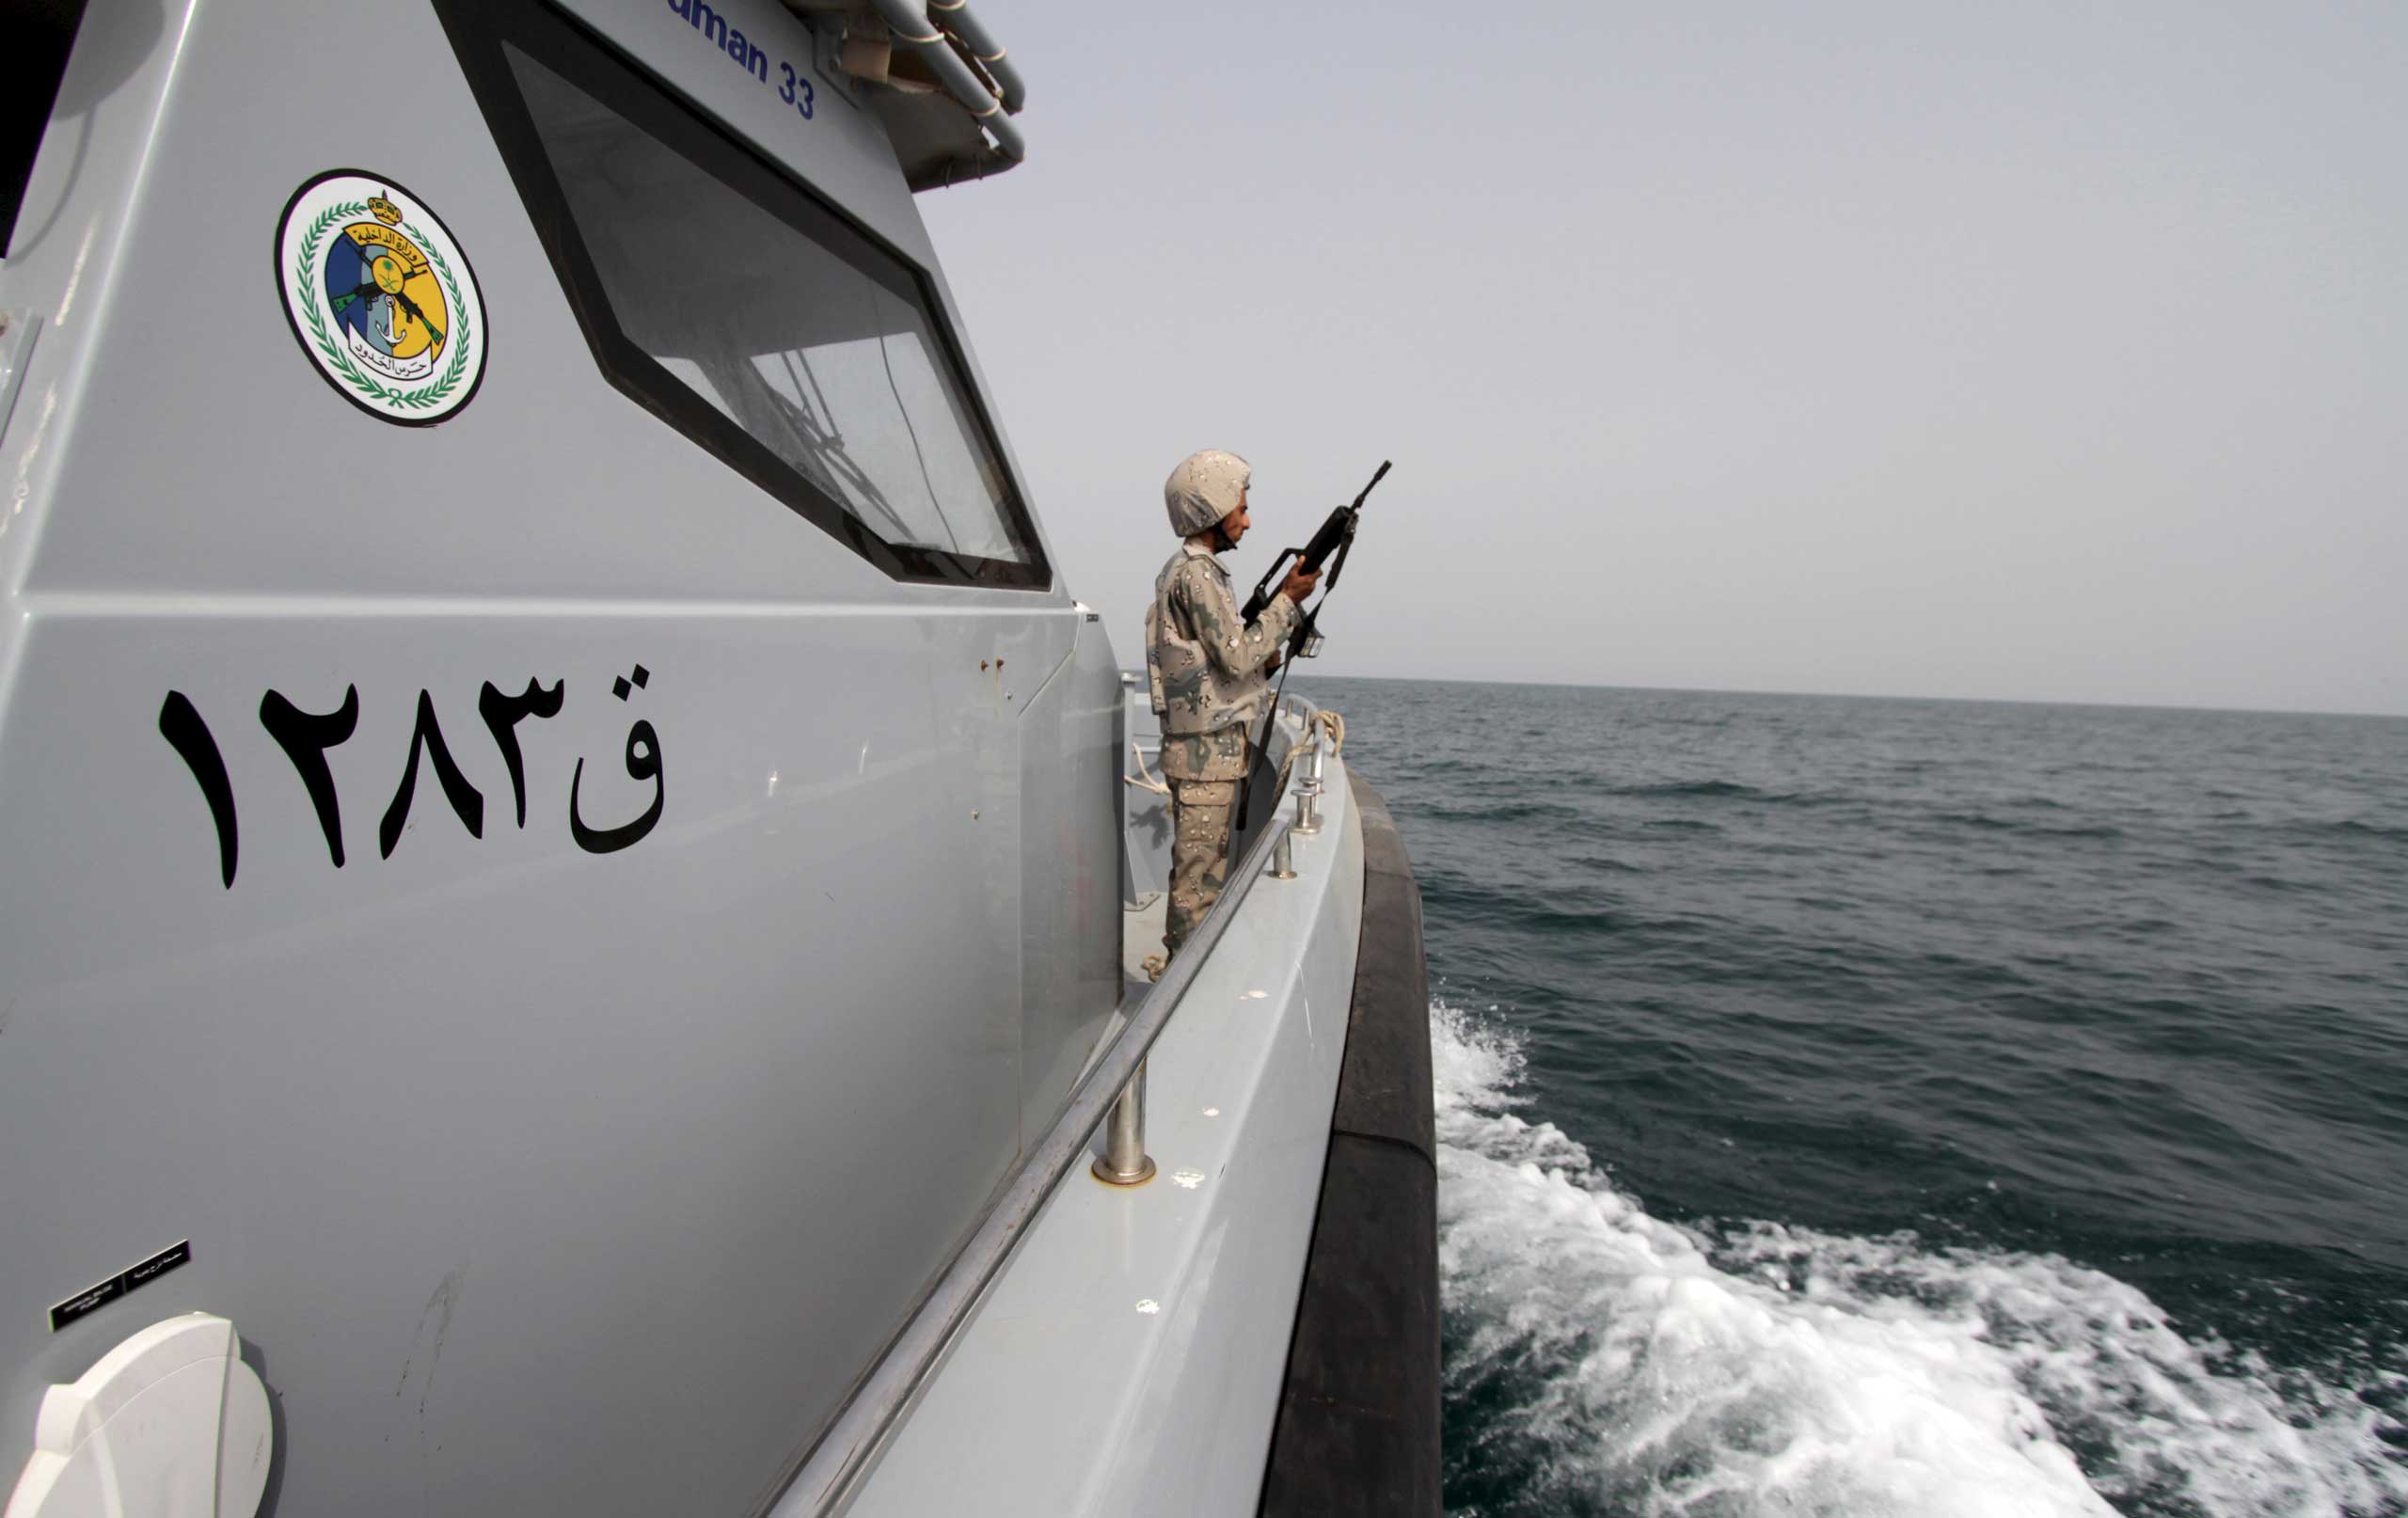 A Saudi border guard watches as he stands in a boat off the coast of the Red Sea on Saudi Arabia's maritime border with Yemen, near Jizan April 8, 2015.